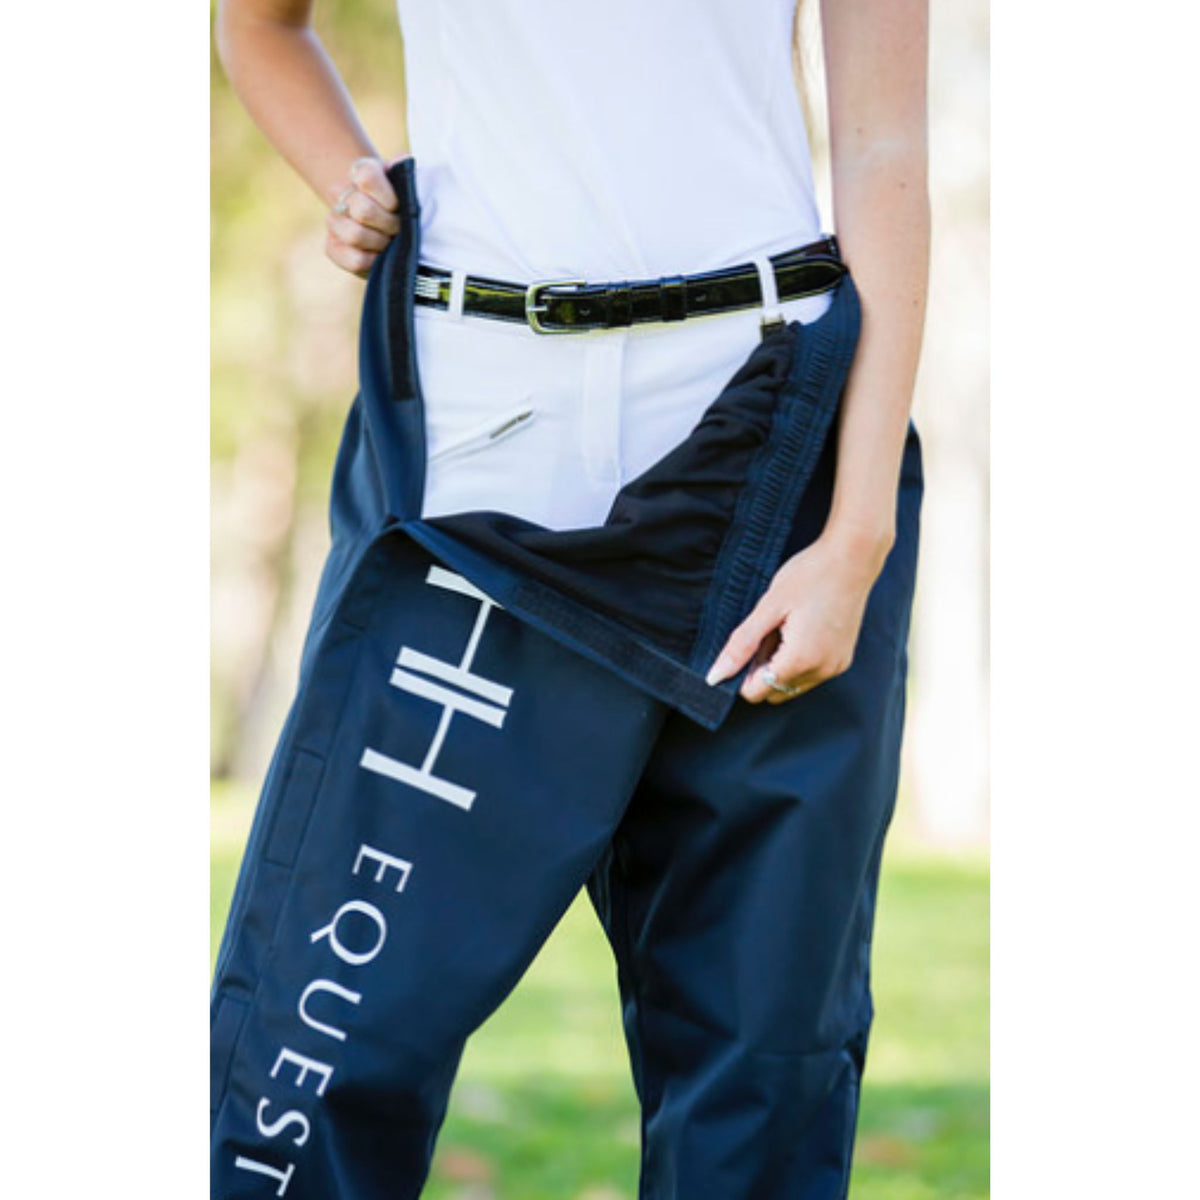 Hampton and Harlow over pants with competition wear underneath, opened at side.